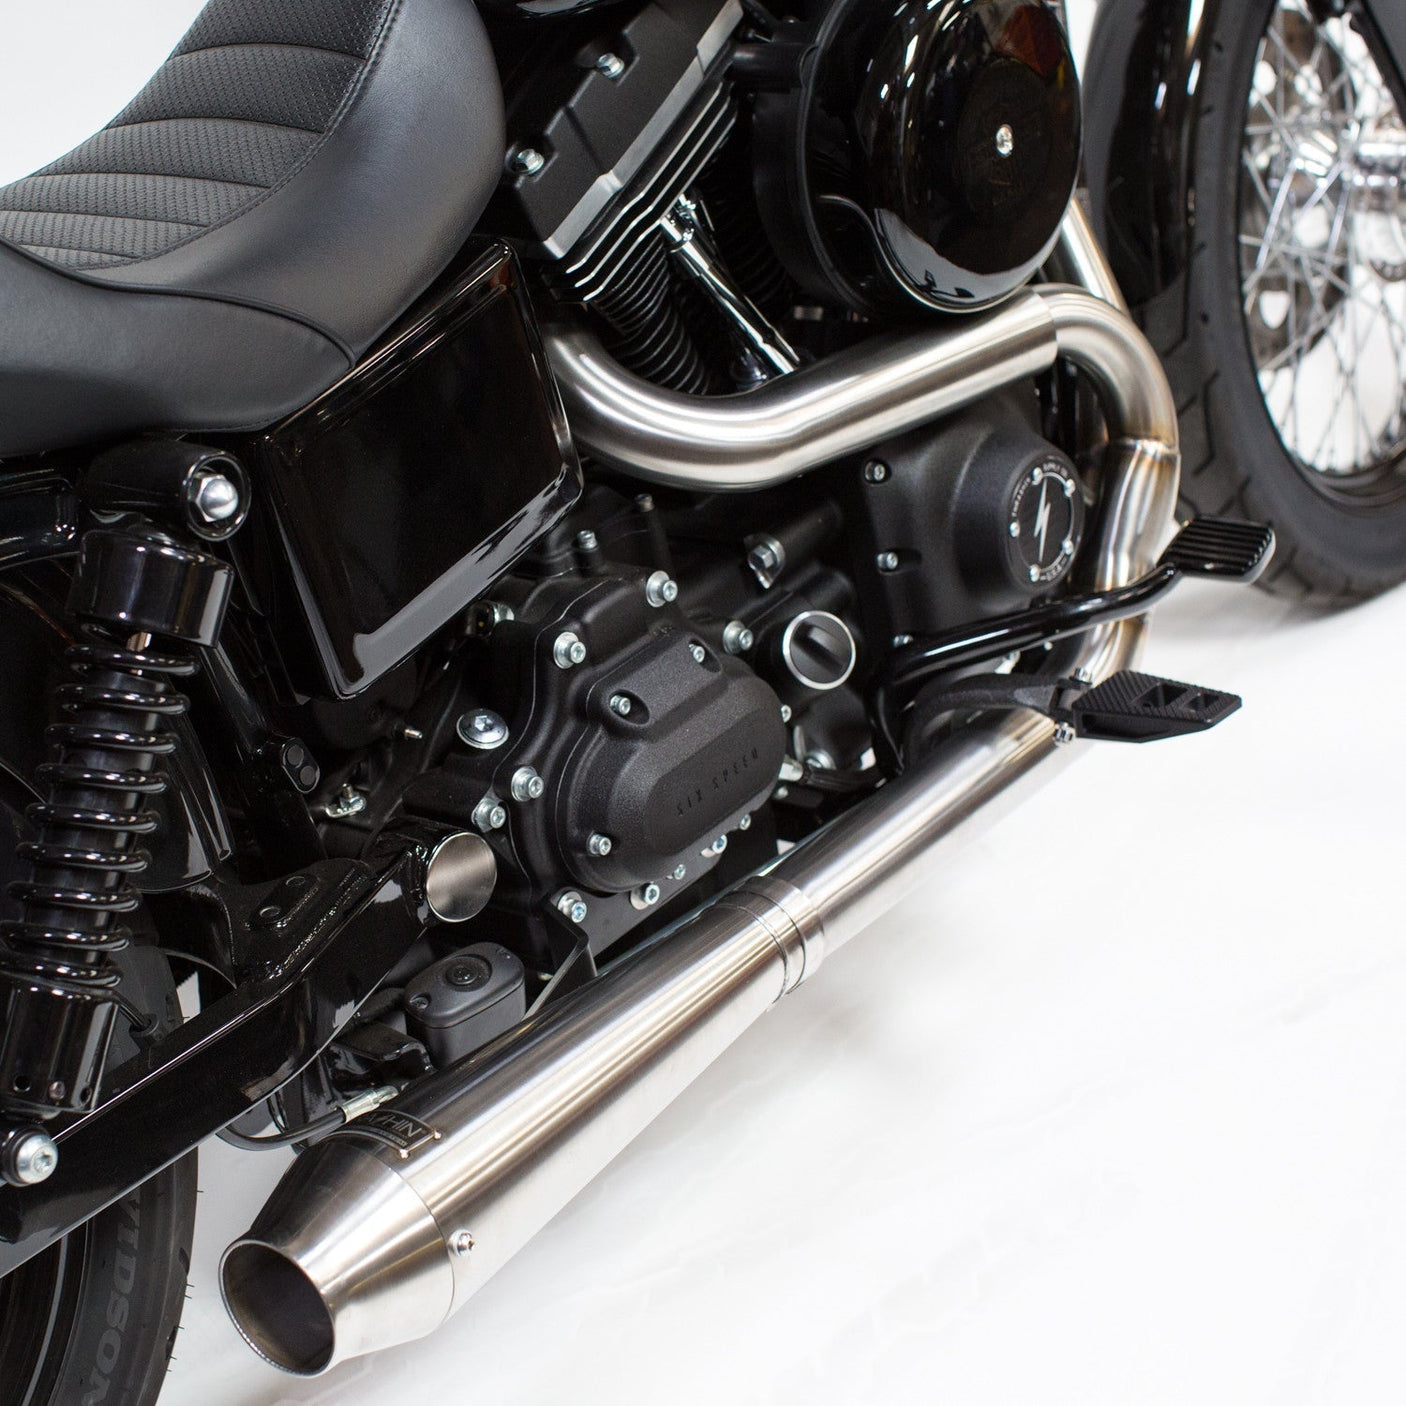 OG Stainless Exhaust w/ Removable Baffle & End Cap - Dyna - Blood Eagle Speed Shop